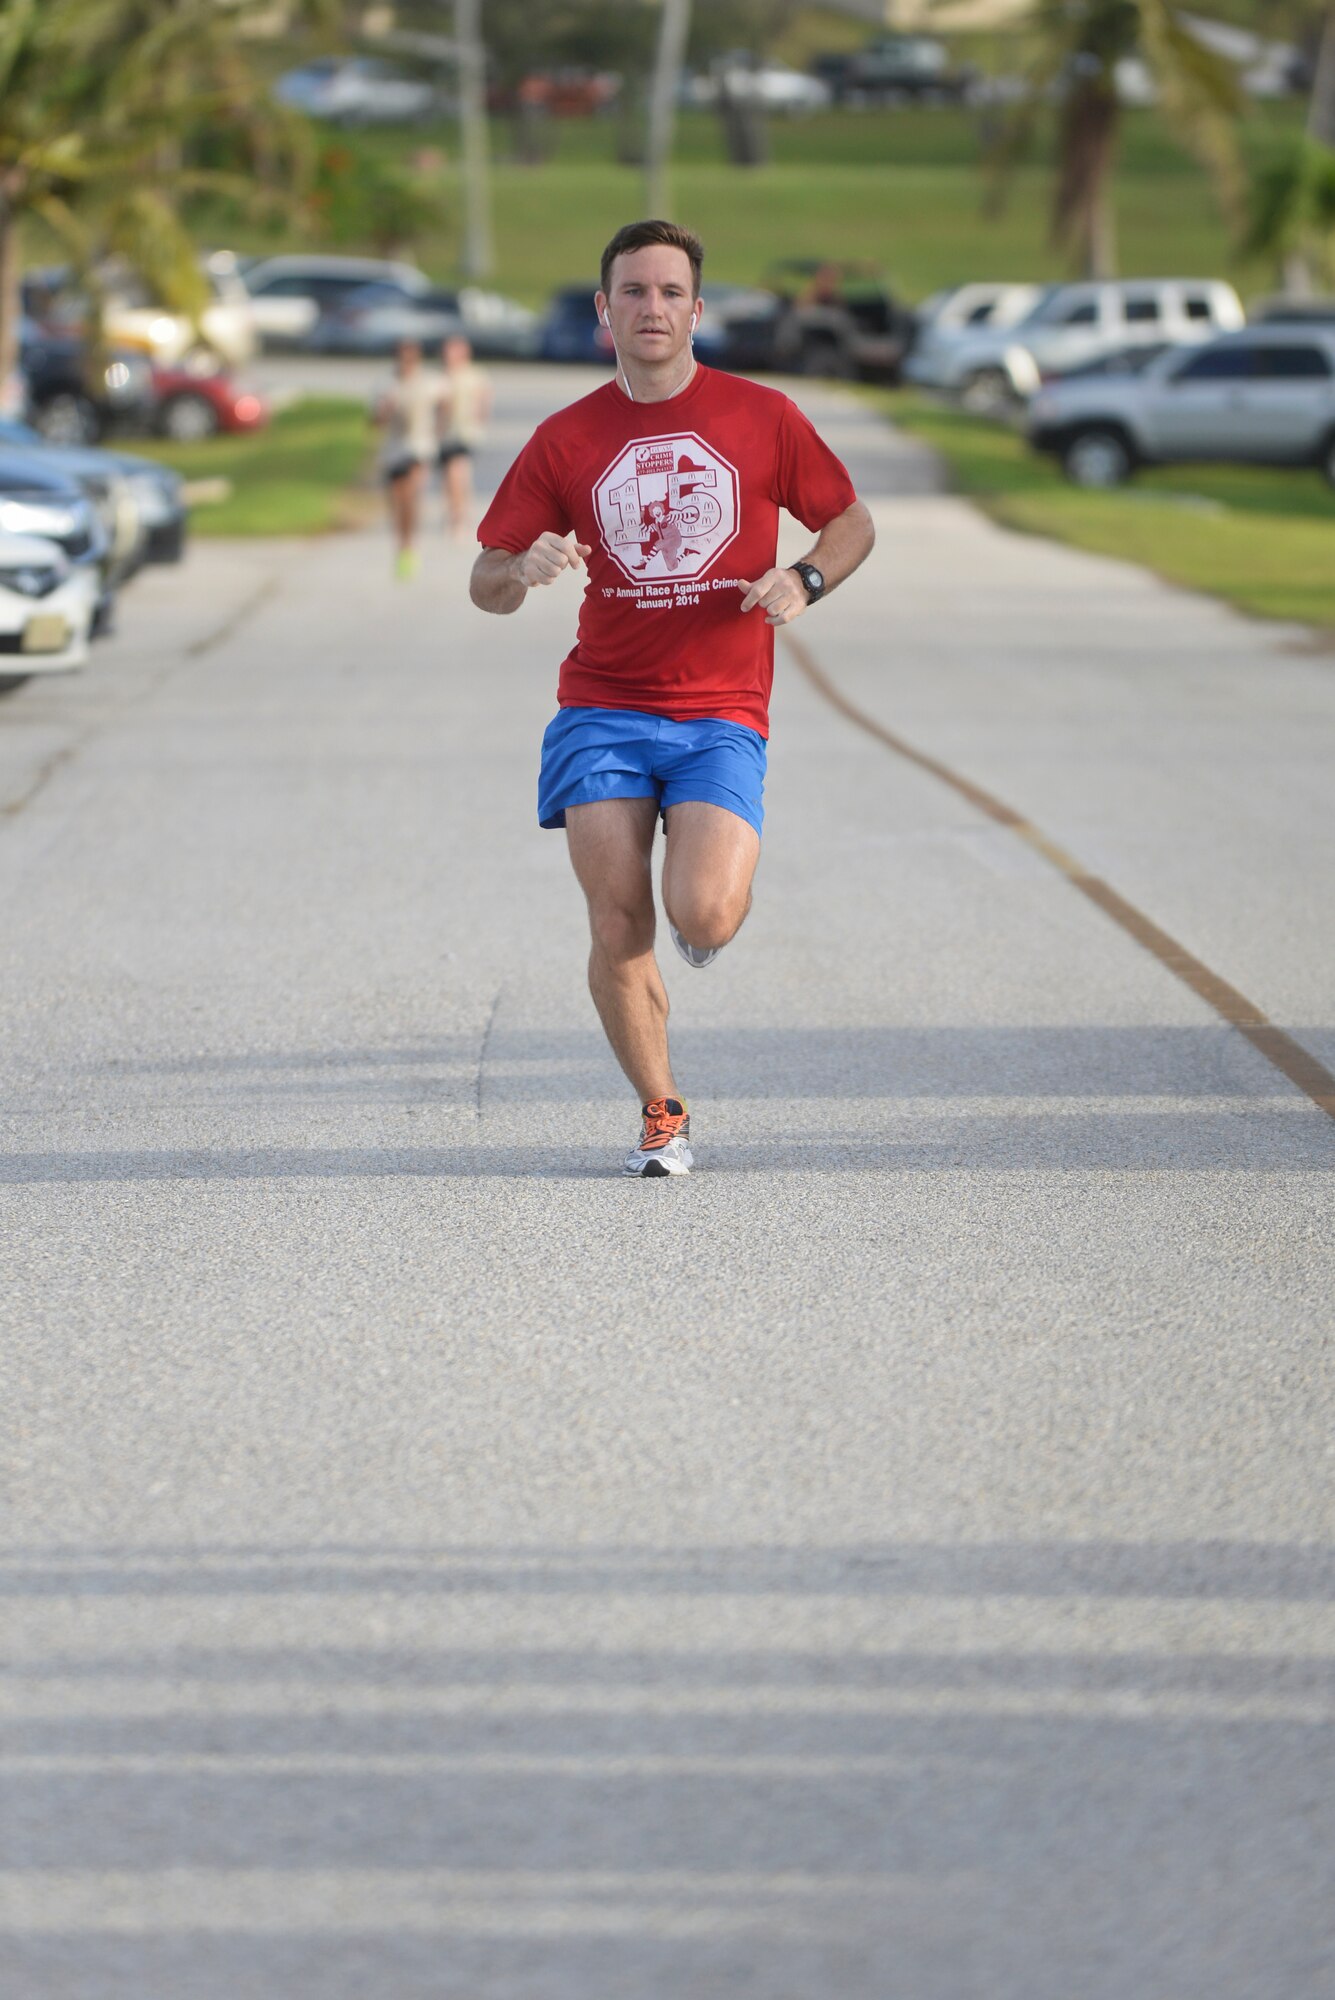 Daniel Guy, race participant, runs toward the finish line during the Red, White and Blue 5K July 1, 2015, at Andersen Air Force Base, Guam. Guy took second place for the males with a time of 19 minutes, 55 seconds. (U.S. Air Force photo by Senior Airman Katrina M. Brisbin/Released)